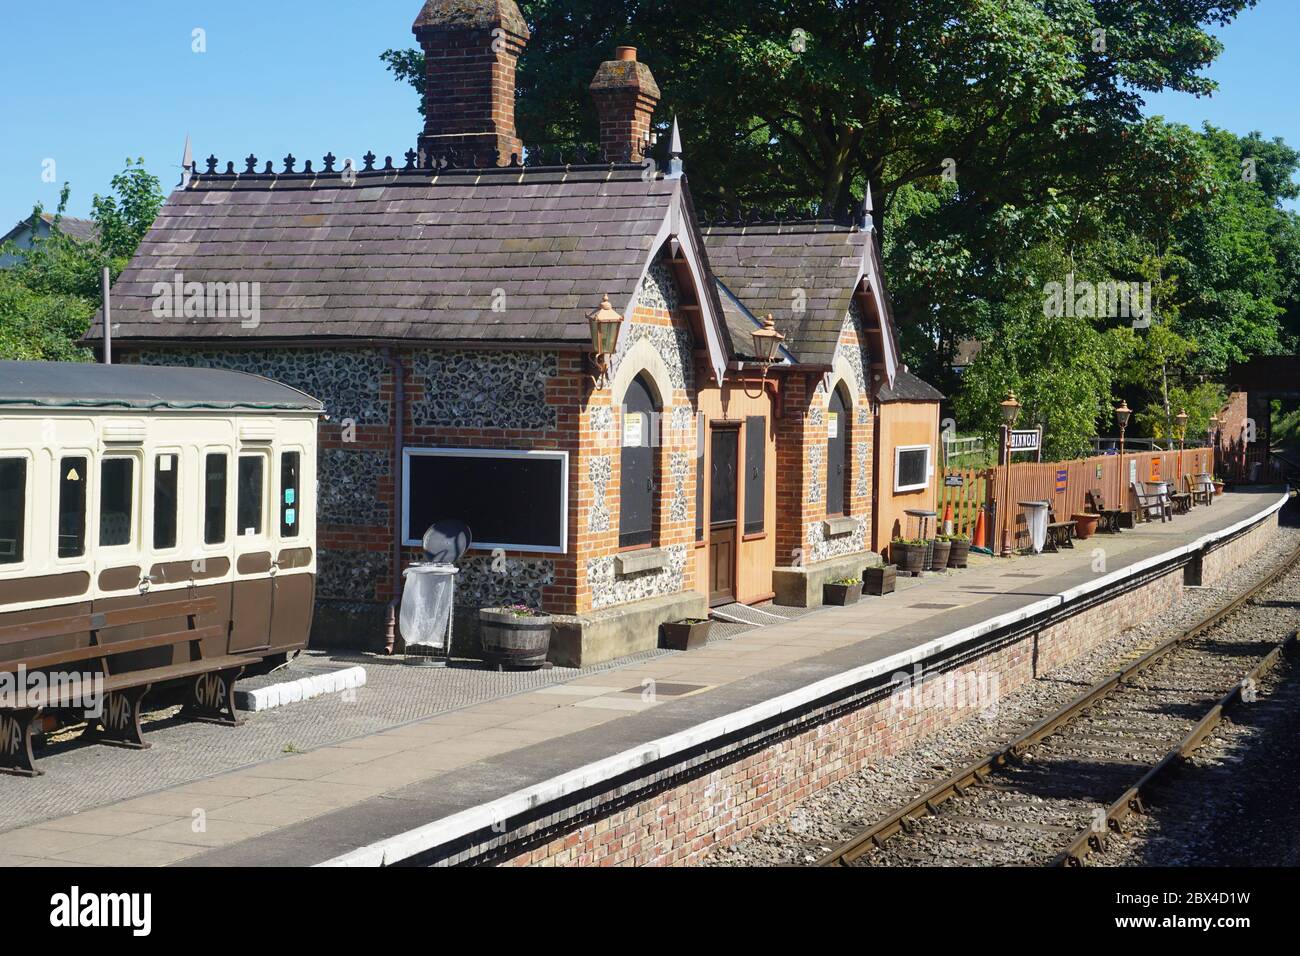 English Heritage Chinnor and Princes Risborough Railway Station at Chinnor, Oxfordshire, UK Stock Photo